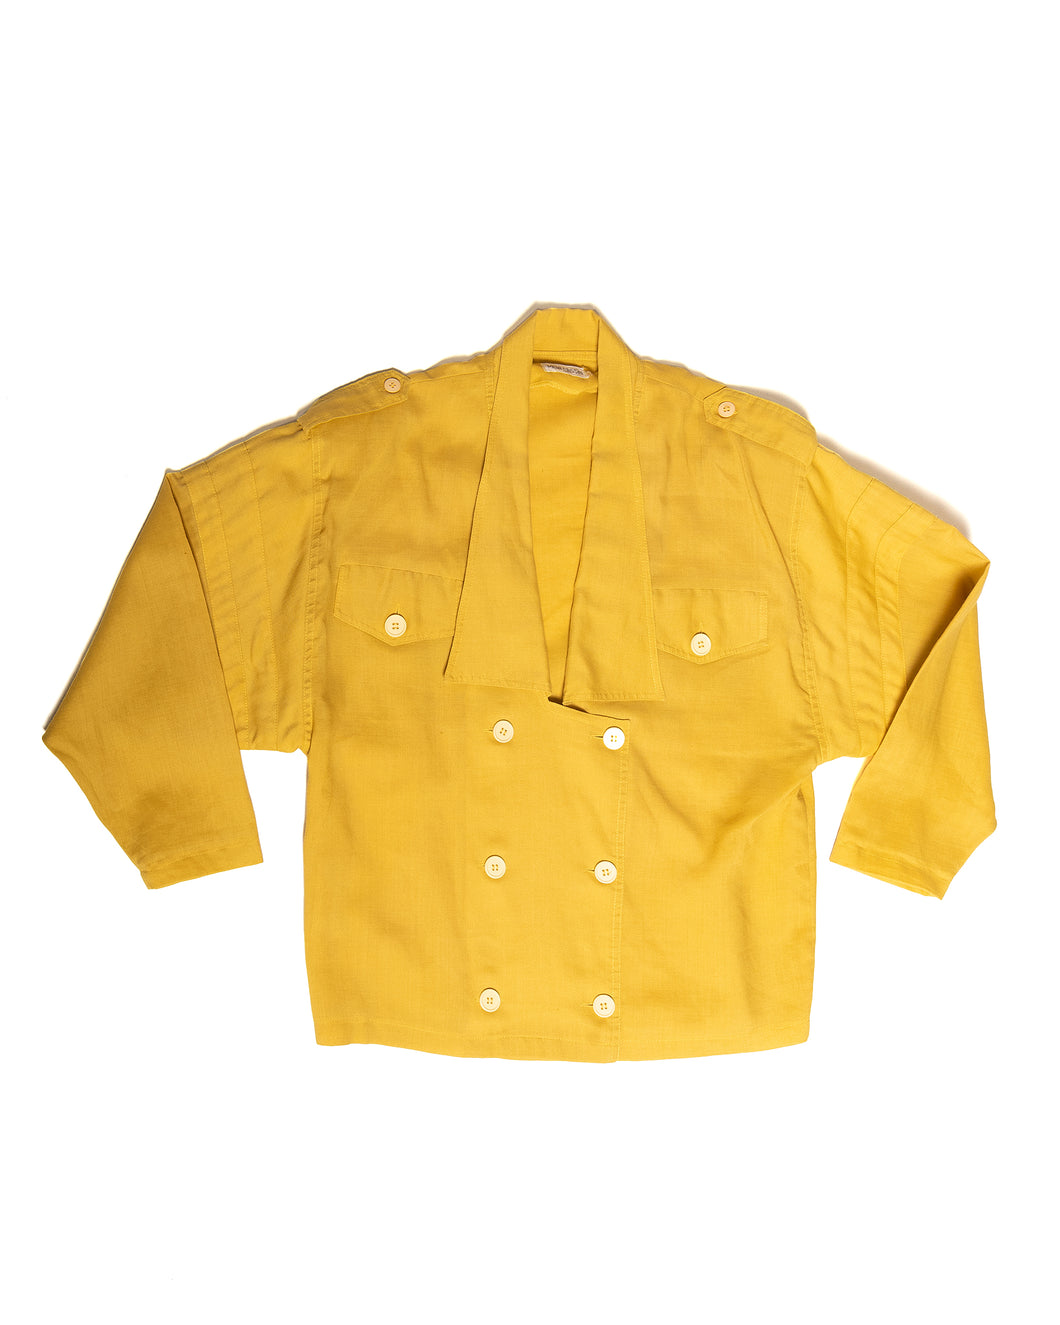 80s Boxy Mustard Button Up Double Breasted Shirt Jacket